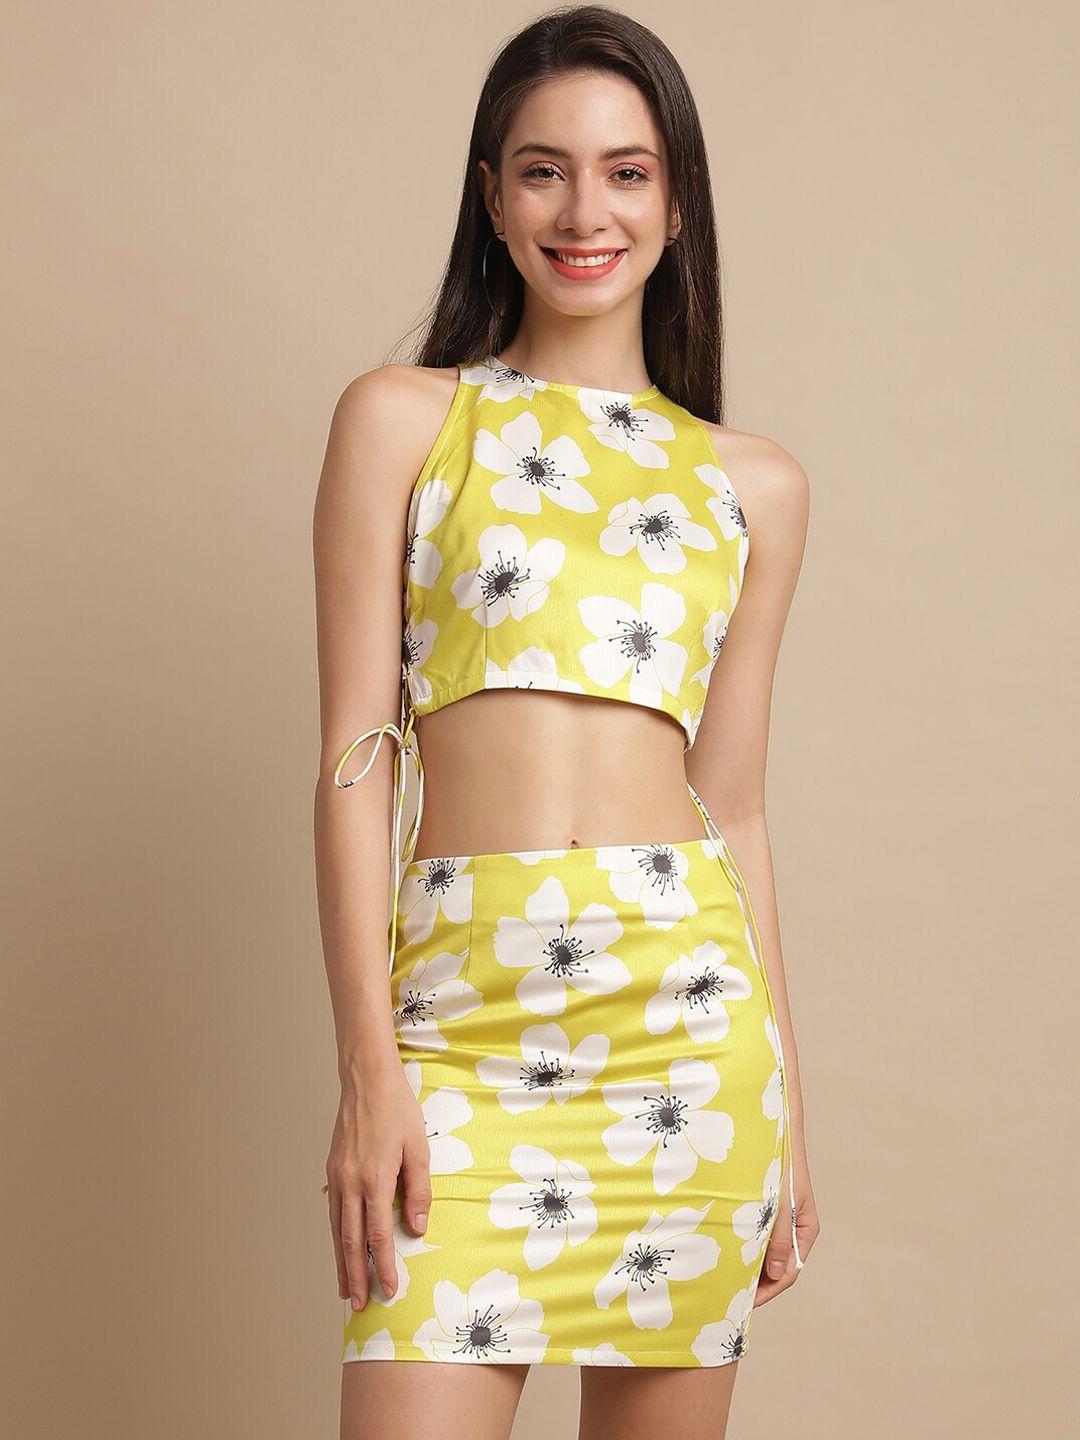 blanc9 floral printed tie-up crop top & fitted mini skirt